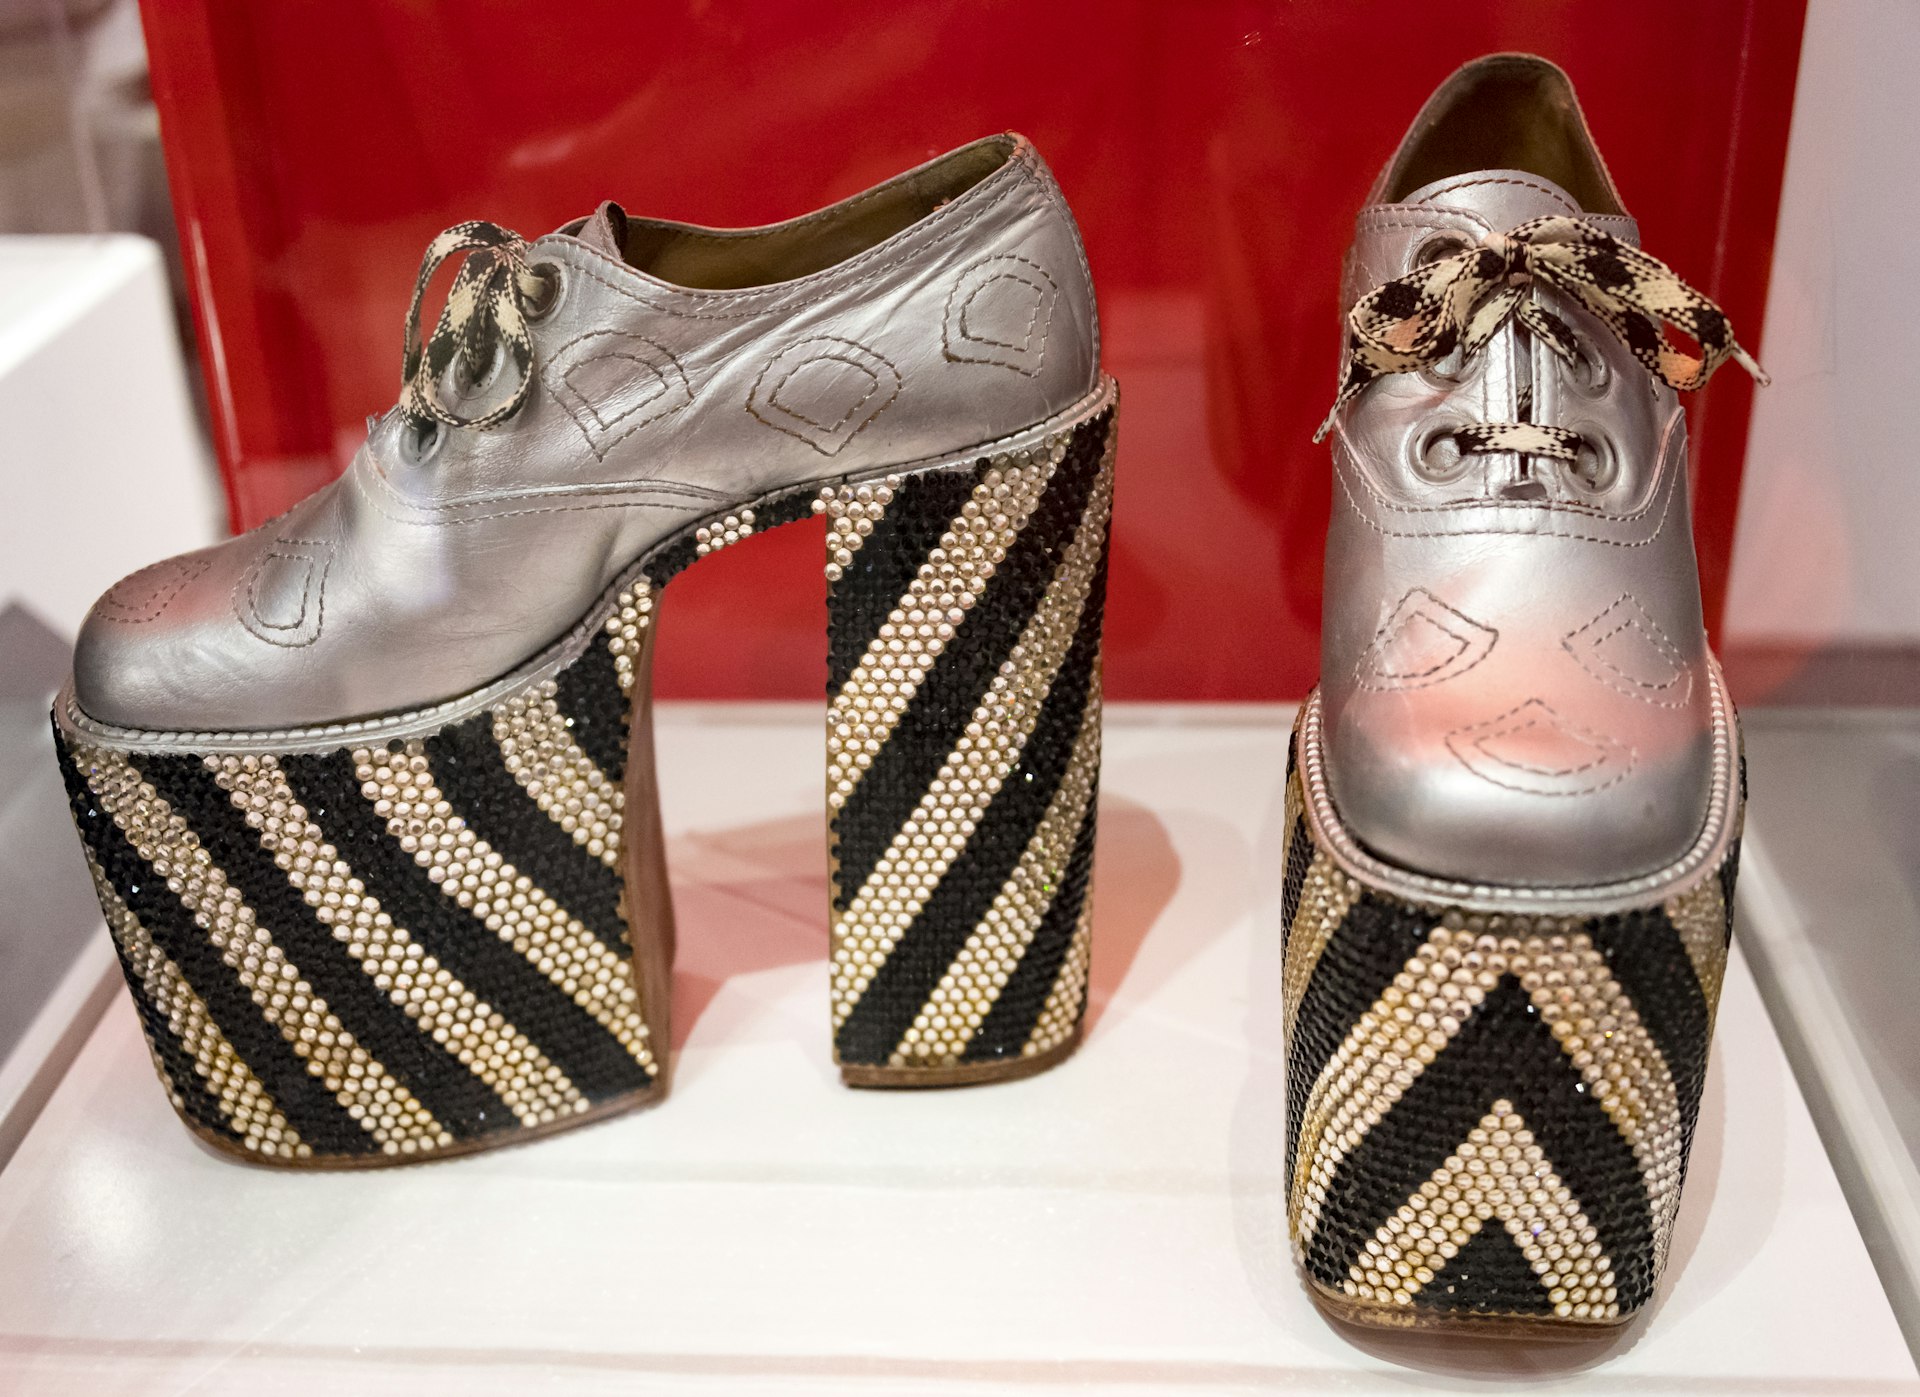 Closeup of Elton John's high heel shoes that measure 7.5 inches high at the Bata Shoe Museum in Toronto